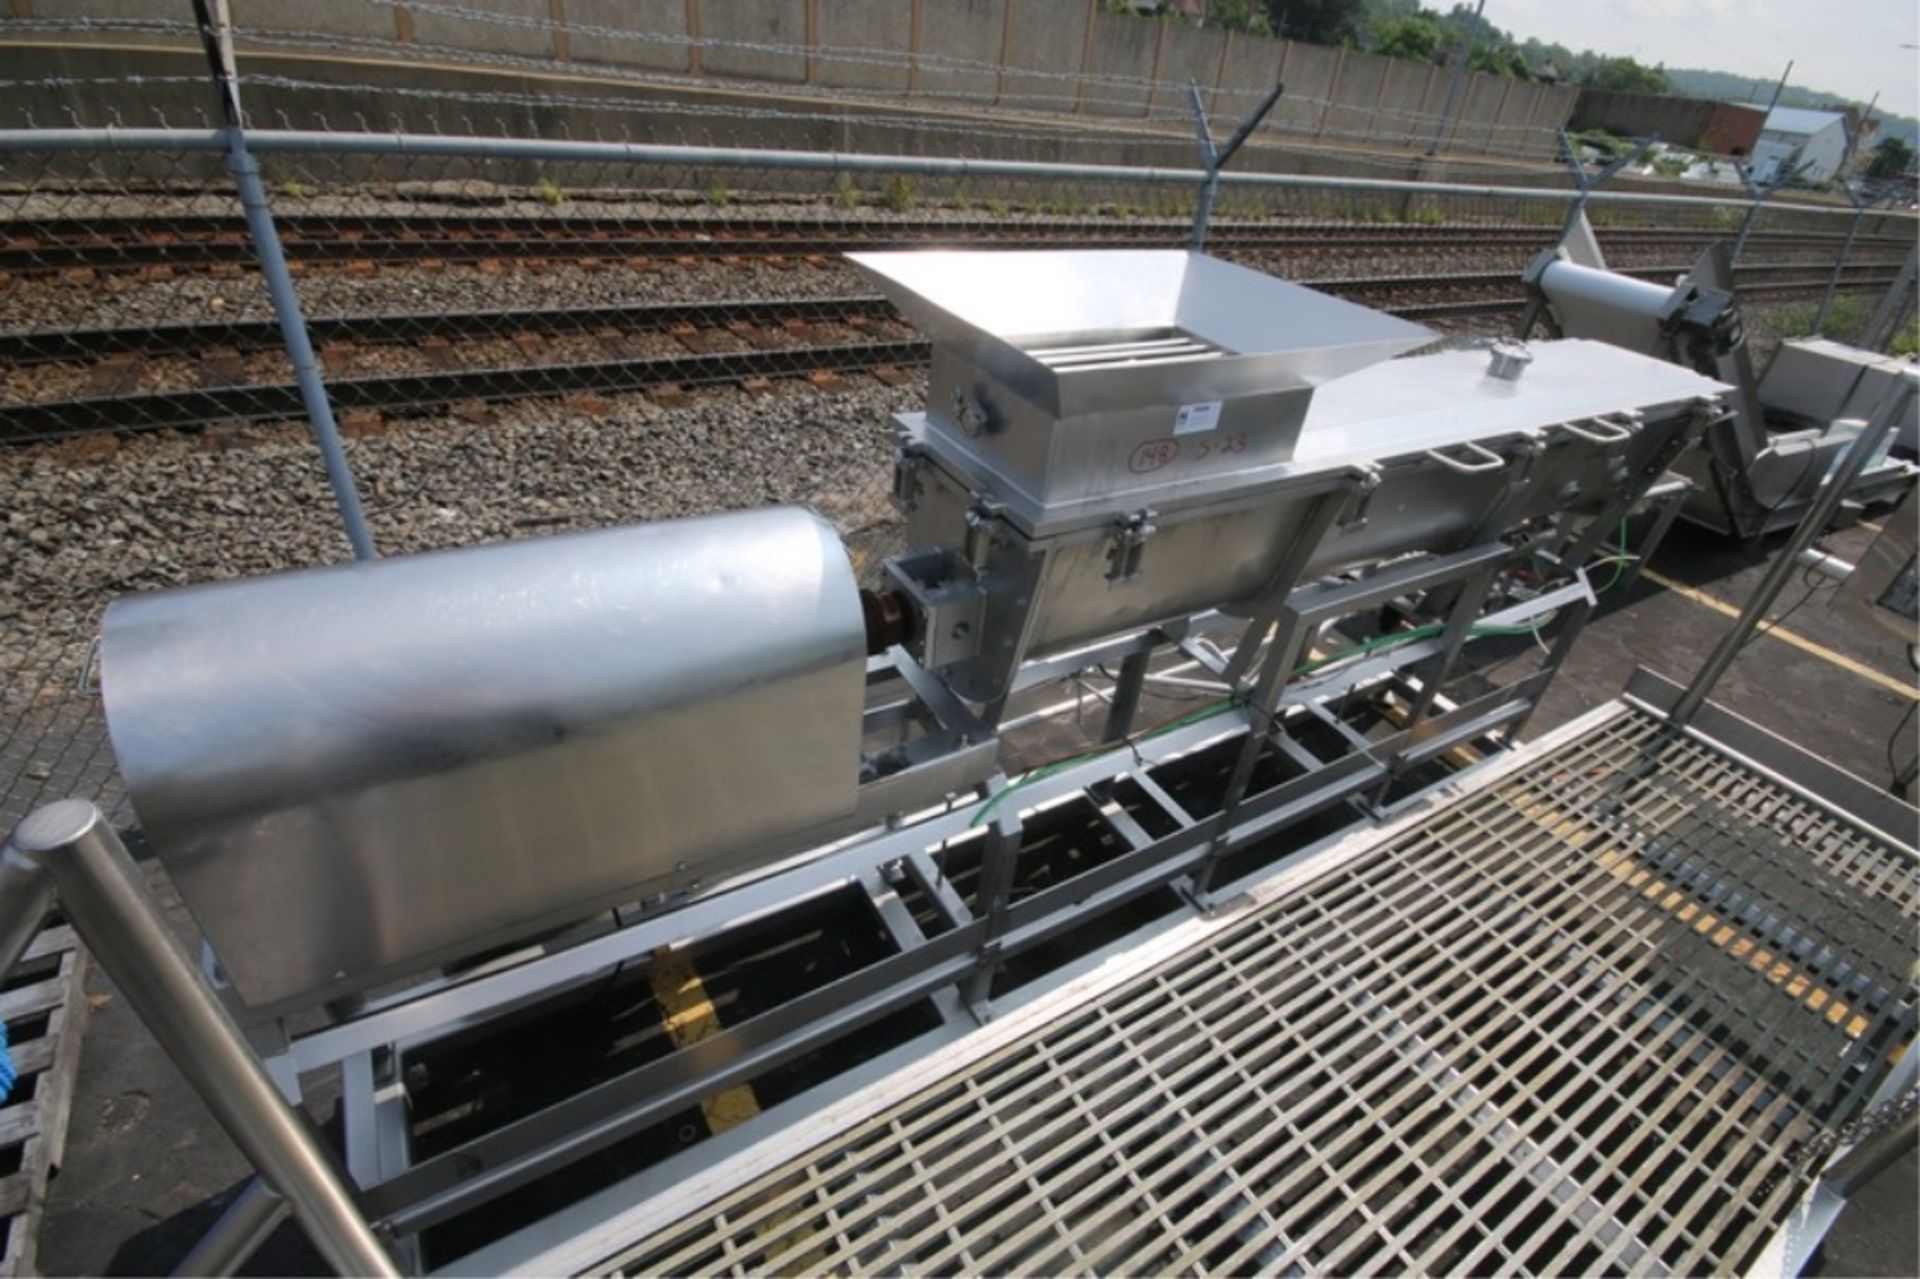 Koss S/S Cheese Cooker, SN 7S40, with 8' L x 15" W x 17" D Auger Area, 12" Auger, with Nord 20 hp - Image 3 of 14